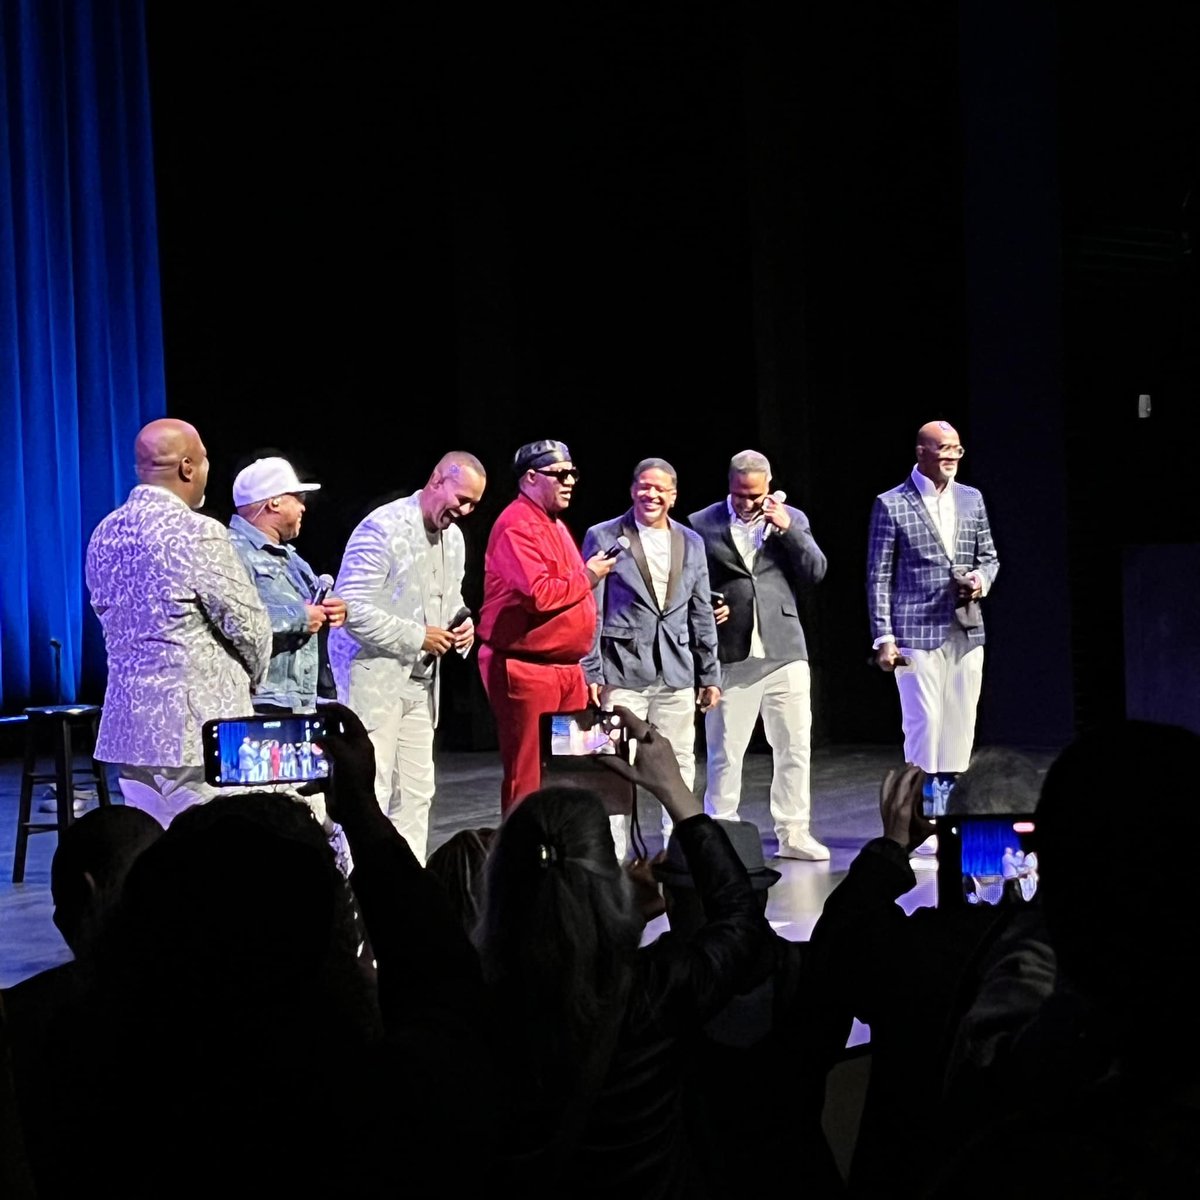 SOLD OUT And an amazing night when our dear friend, the legendary Stevie Wonder, came onstage! #take6 #take6official #take6music #steviewonder